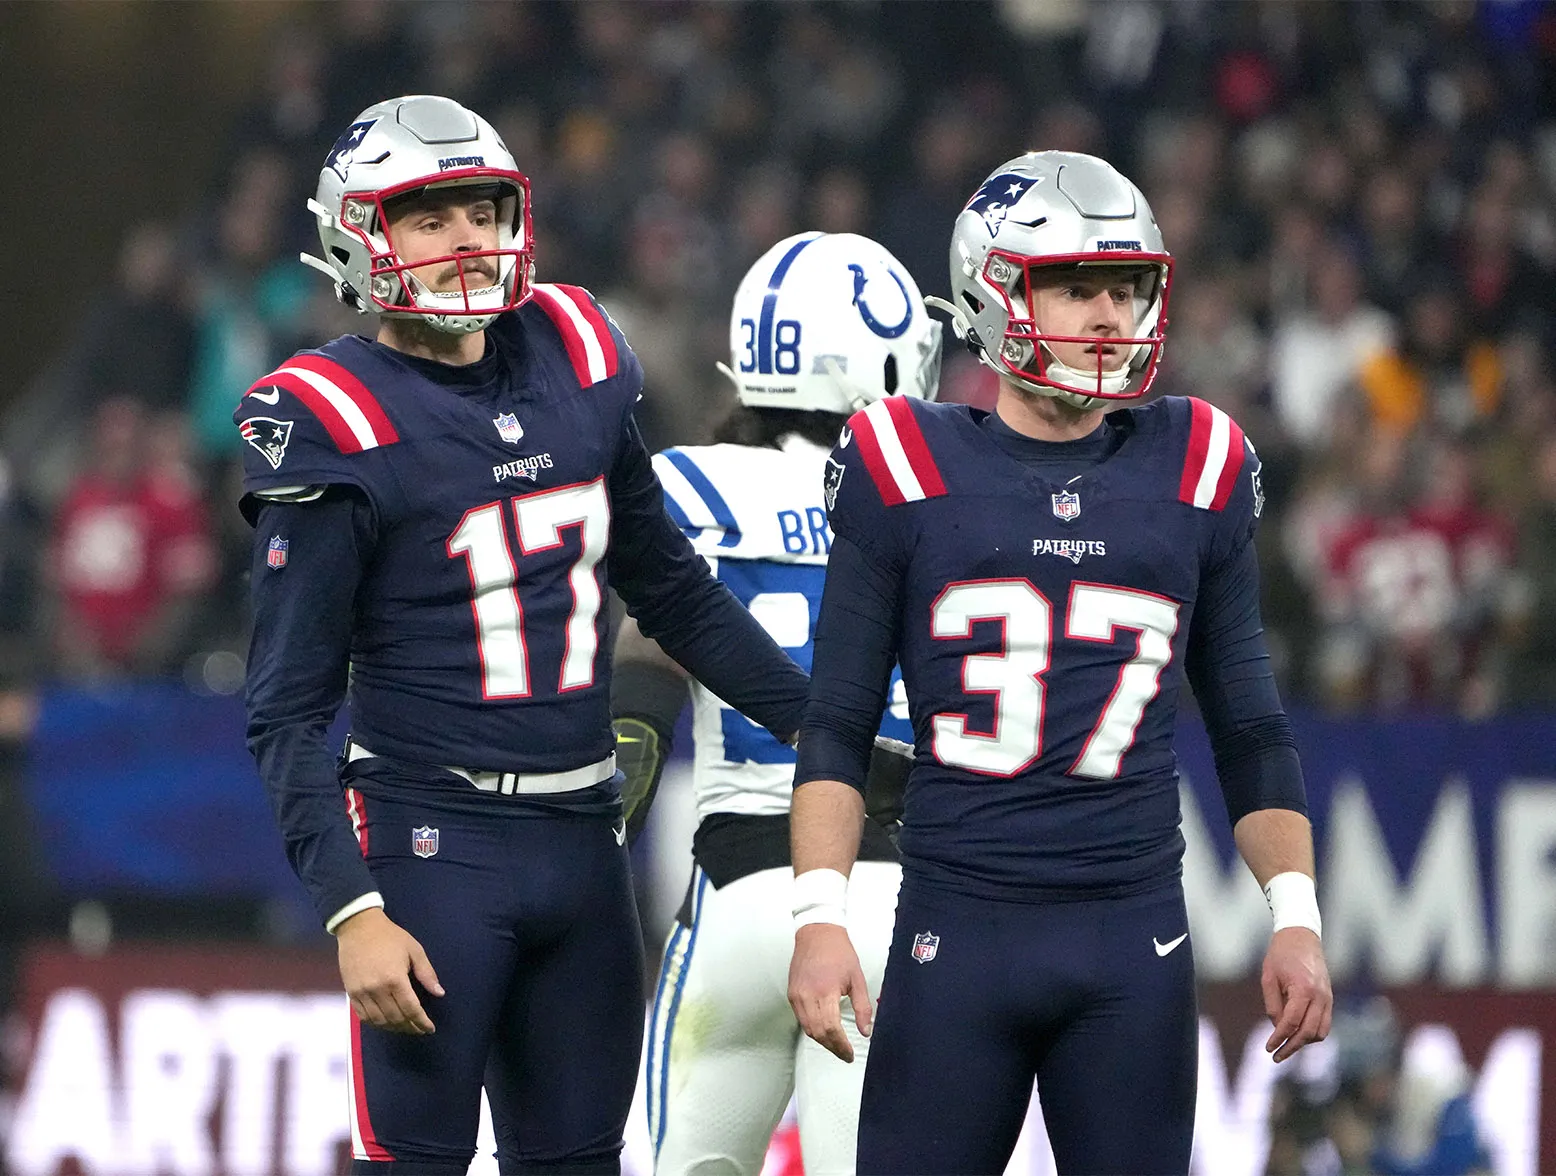 Nov 12, 2023; Frankfurt, Germany; New England Patriots punter Bryce Baringer (17) and place kicker Chad Ryland (37) react after a missed field goal against the Indianapolis Colts in the second half during an NFL International Series game at Deutsche Bank Park. Mandatory Credit: Kirby Lee-USA TODAY Sports